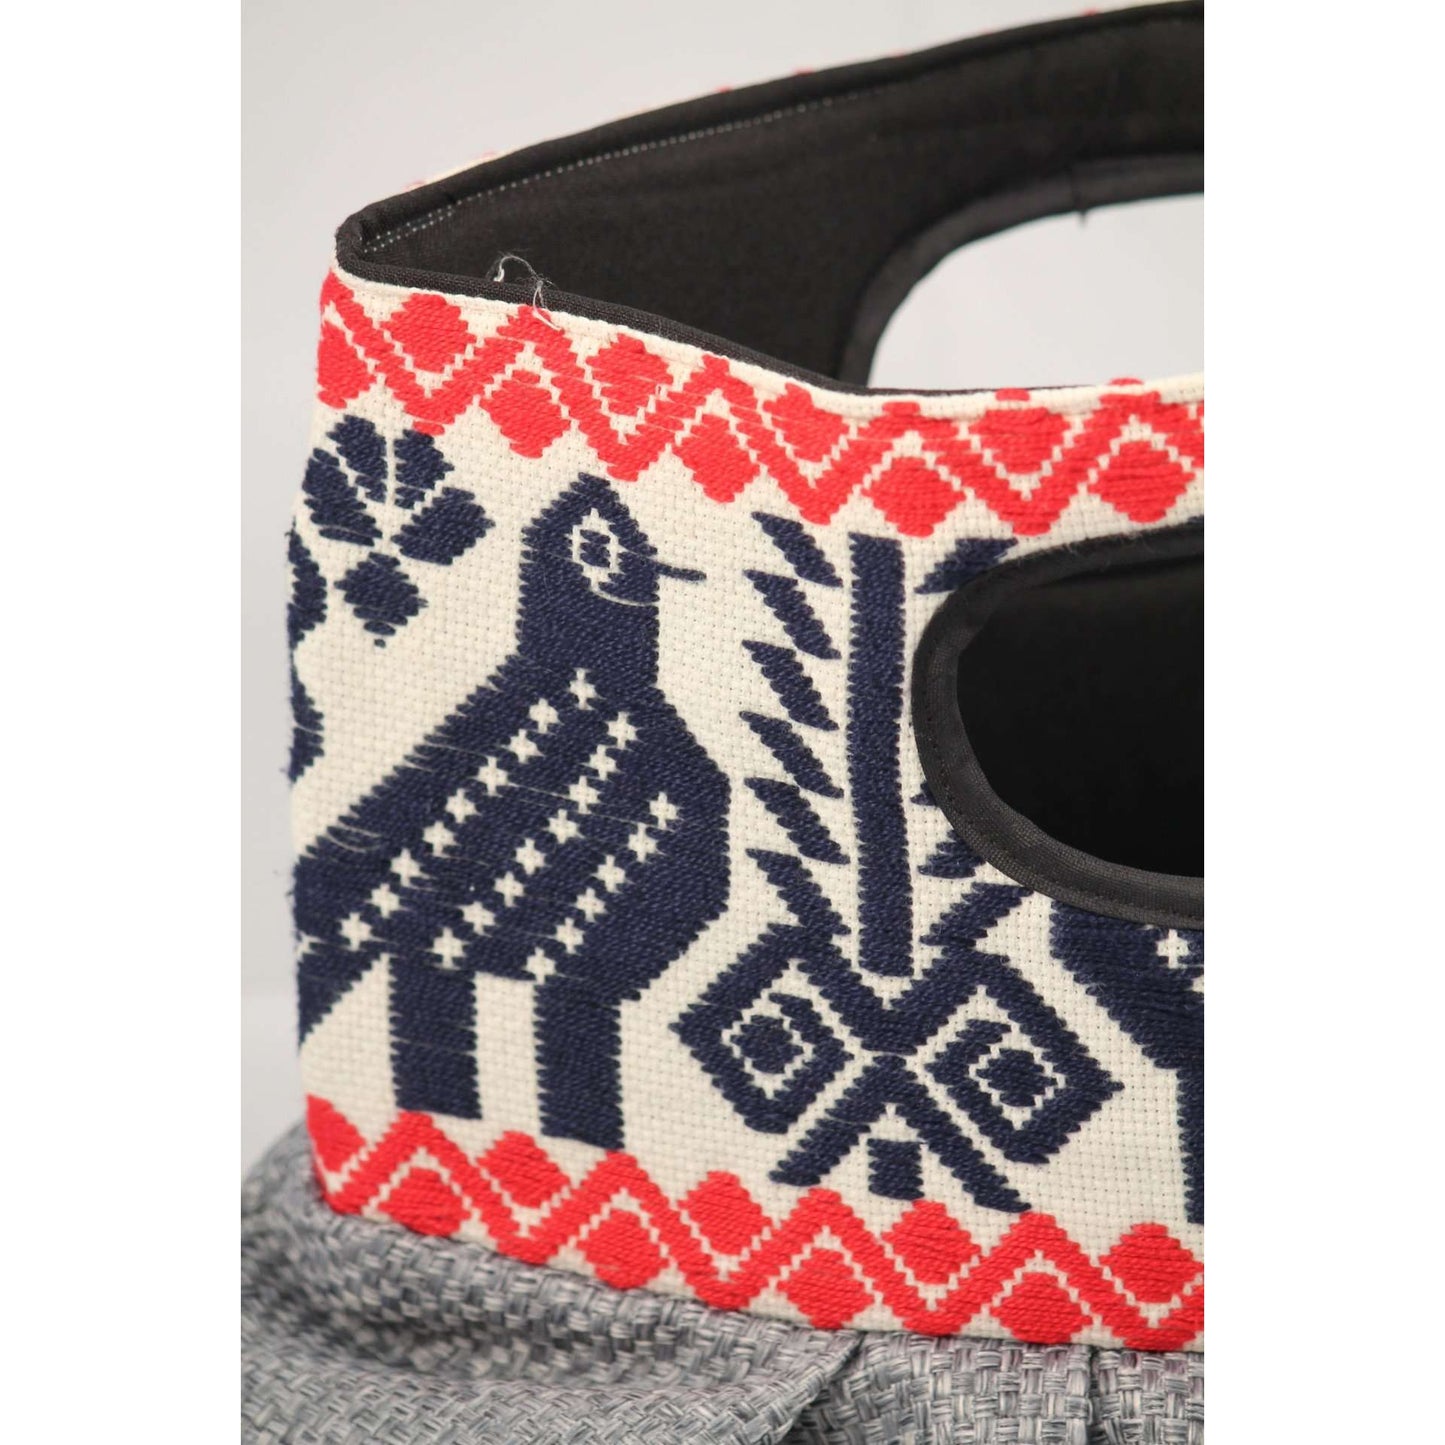 Mexican Purse/Bag/Tote Hand Embroidered Textile, Navy